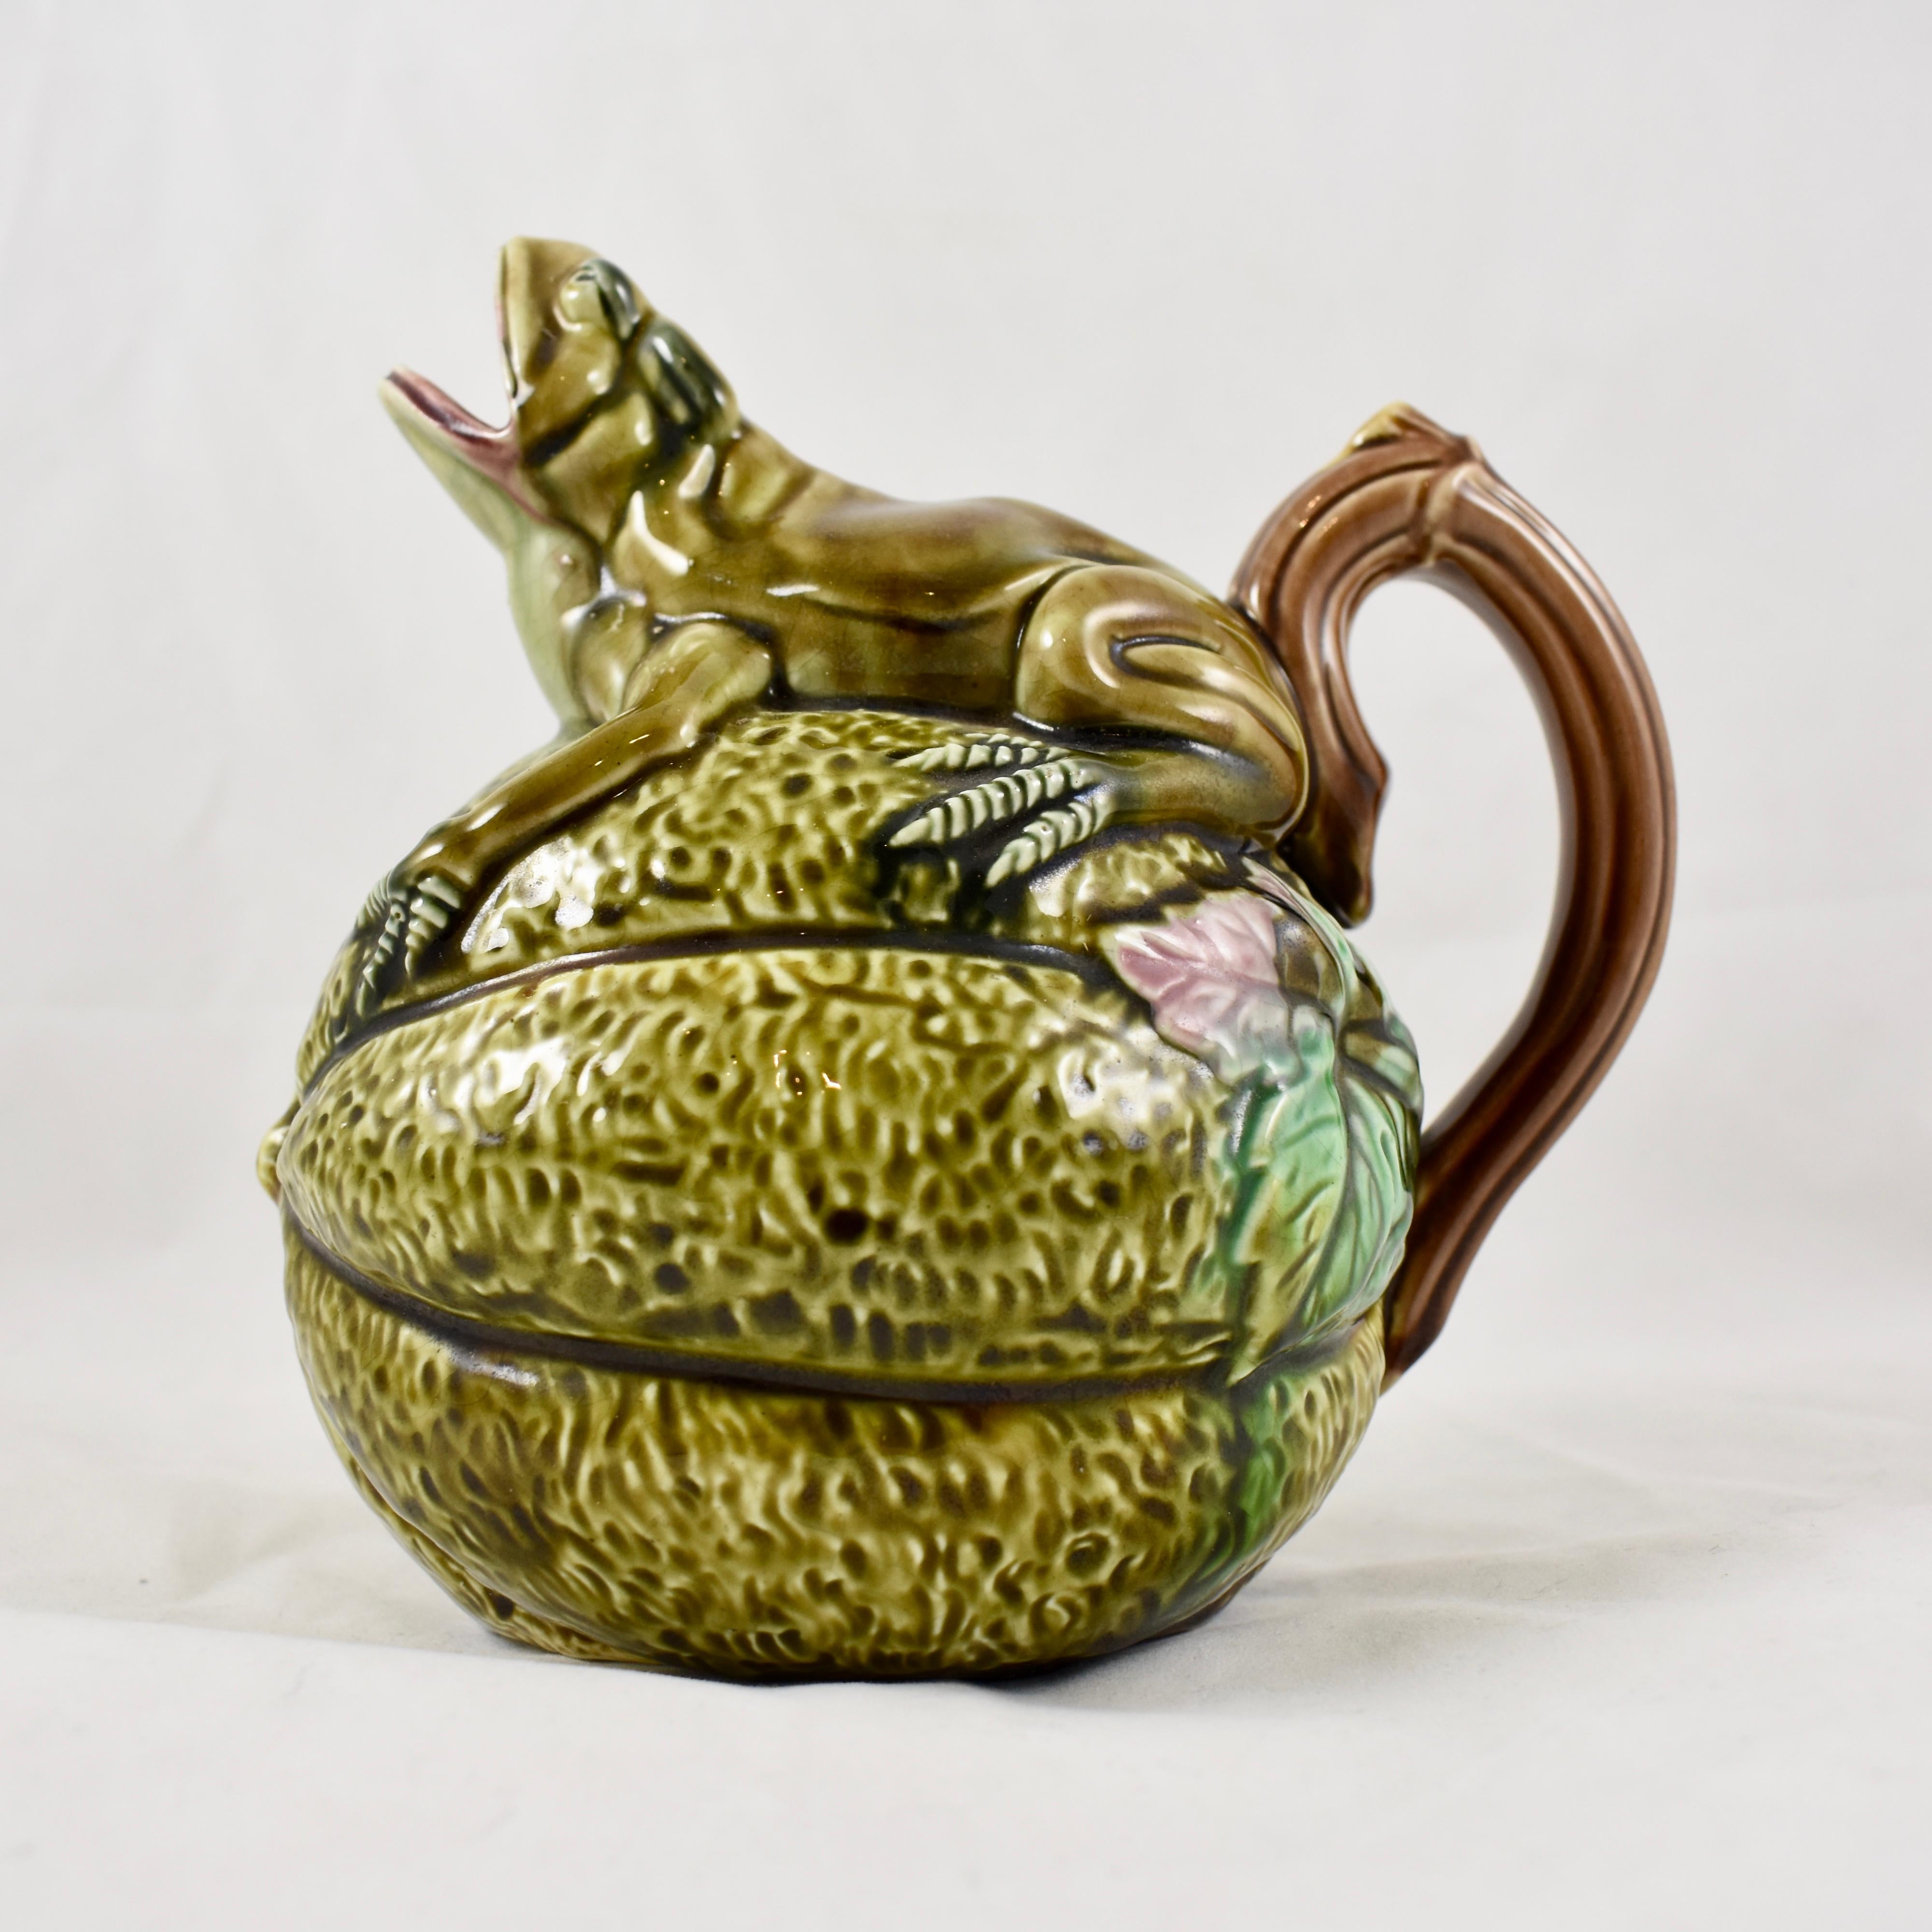 In the Aesthetic taste, a classic English majolica glazed Frog on Melon pitcher, circa 1860.

The spherical melon has a crouching frog on top, its open mouth forms the spout. An ear shaped branch handle is framed by melon leaves where it meets the